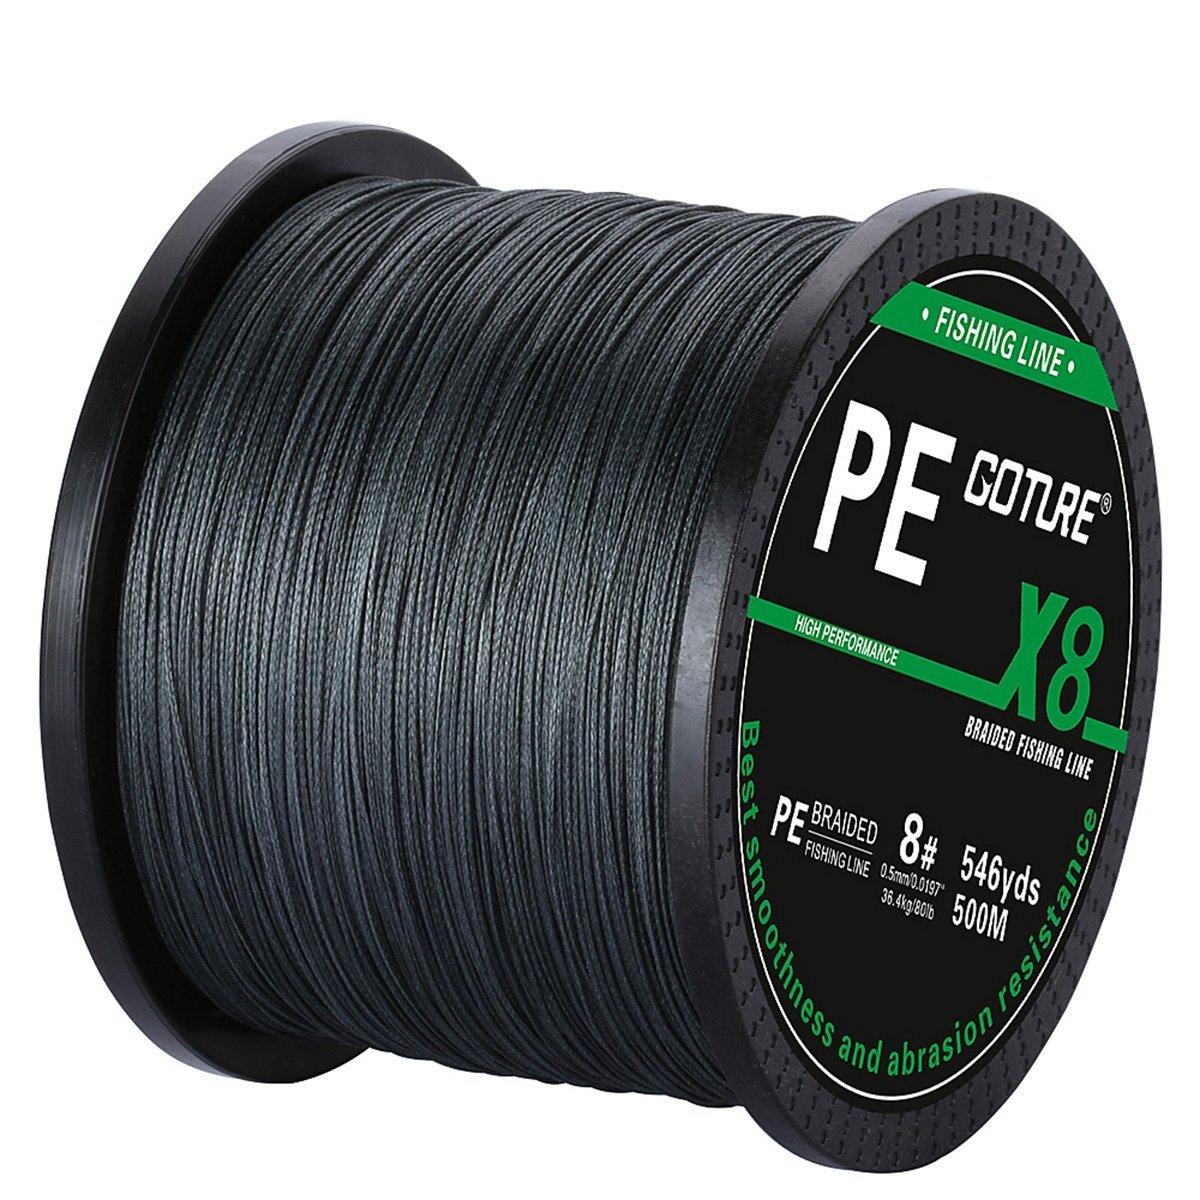 Hook In Hook8 Strand Braided Fishing Line With Scale - Strong Pe